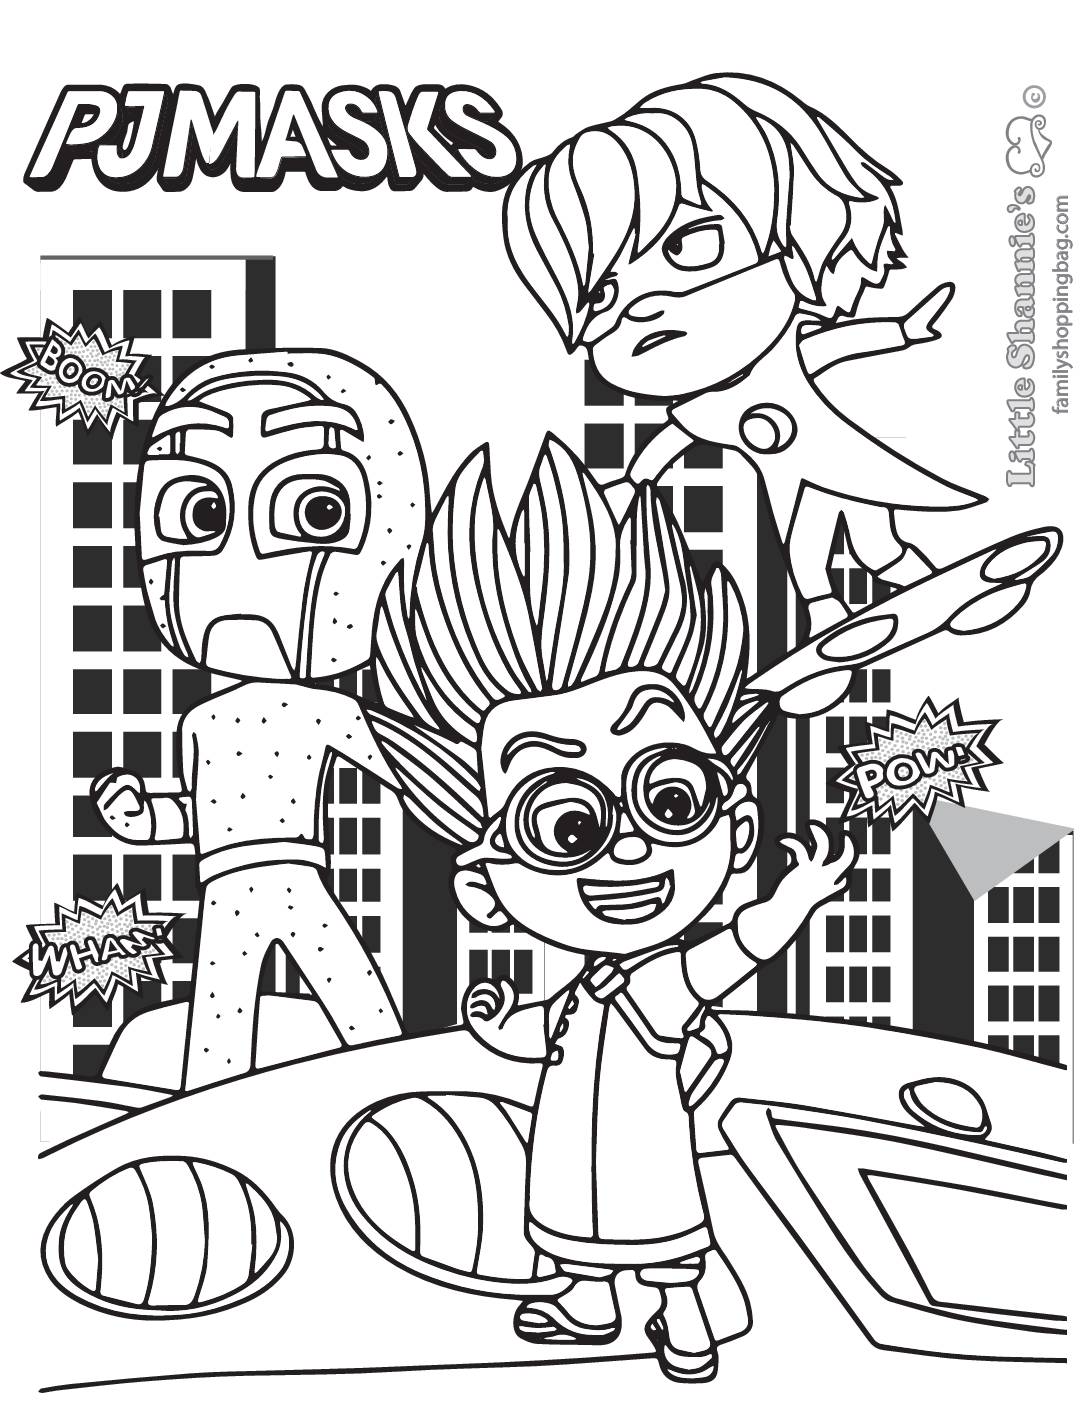 Coloring Page 7 PJ Masks Coloring Pages